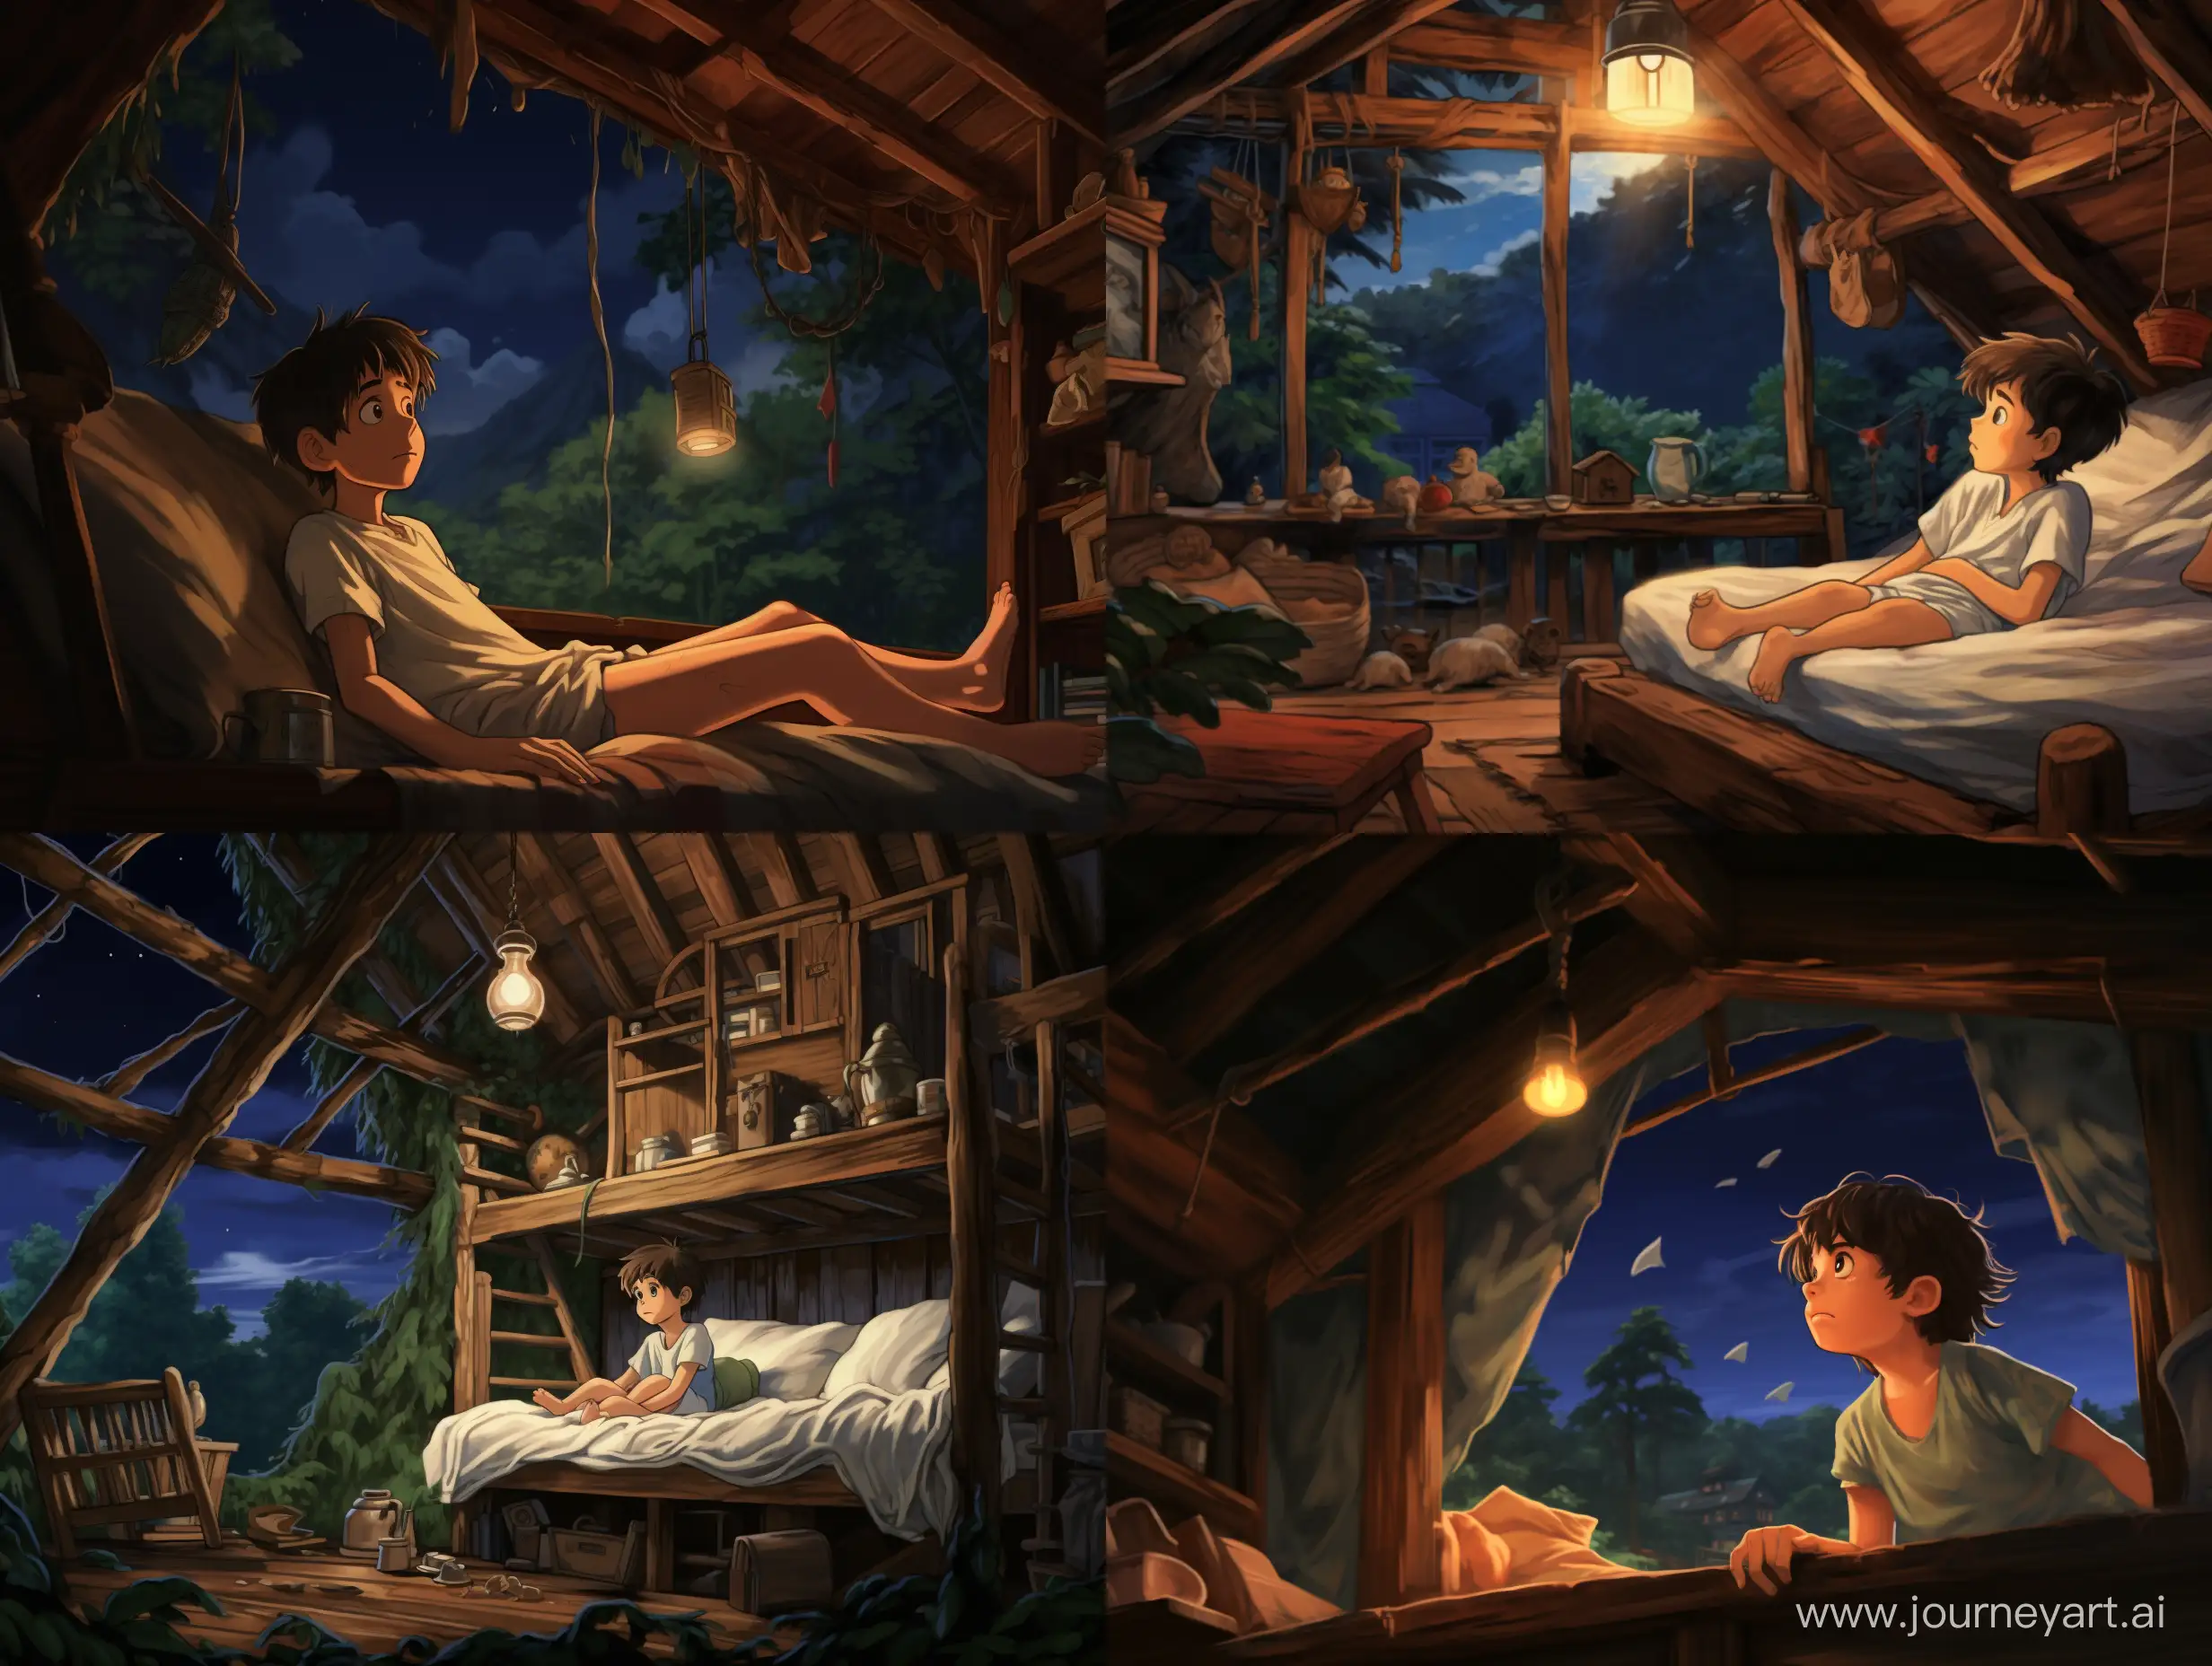 the inside of a dark treehouse with a single window, at night; A twelve-year-old boy, with short, messy, dark-chestnut hair,  dressed in a white t-shirt and shorts, sleeps on a beanbag by the window, mouth open, drooling. ghibli style, hand-painted.